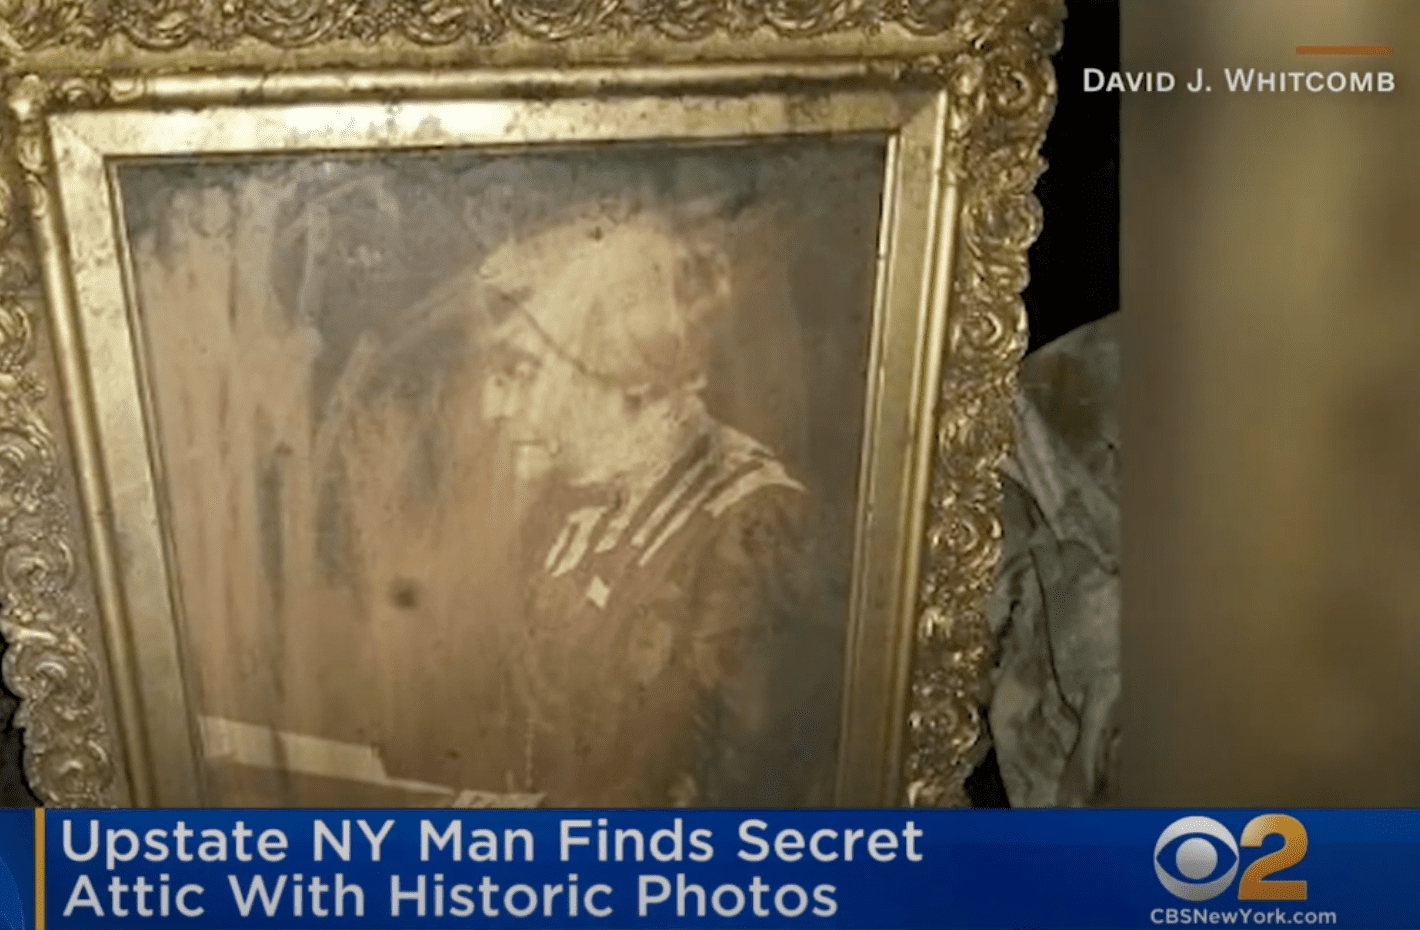 In a hidden attic in New York, a man found an old framed photograph of Susan B. Anthony | Photo: Youtube/CBS New York